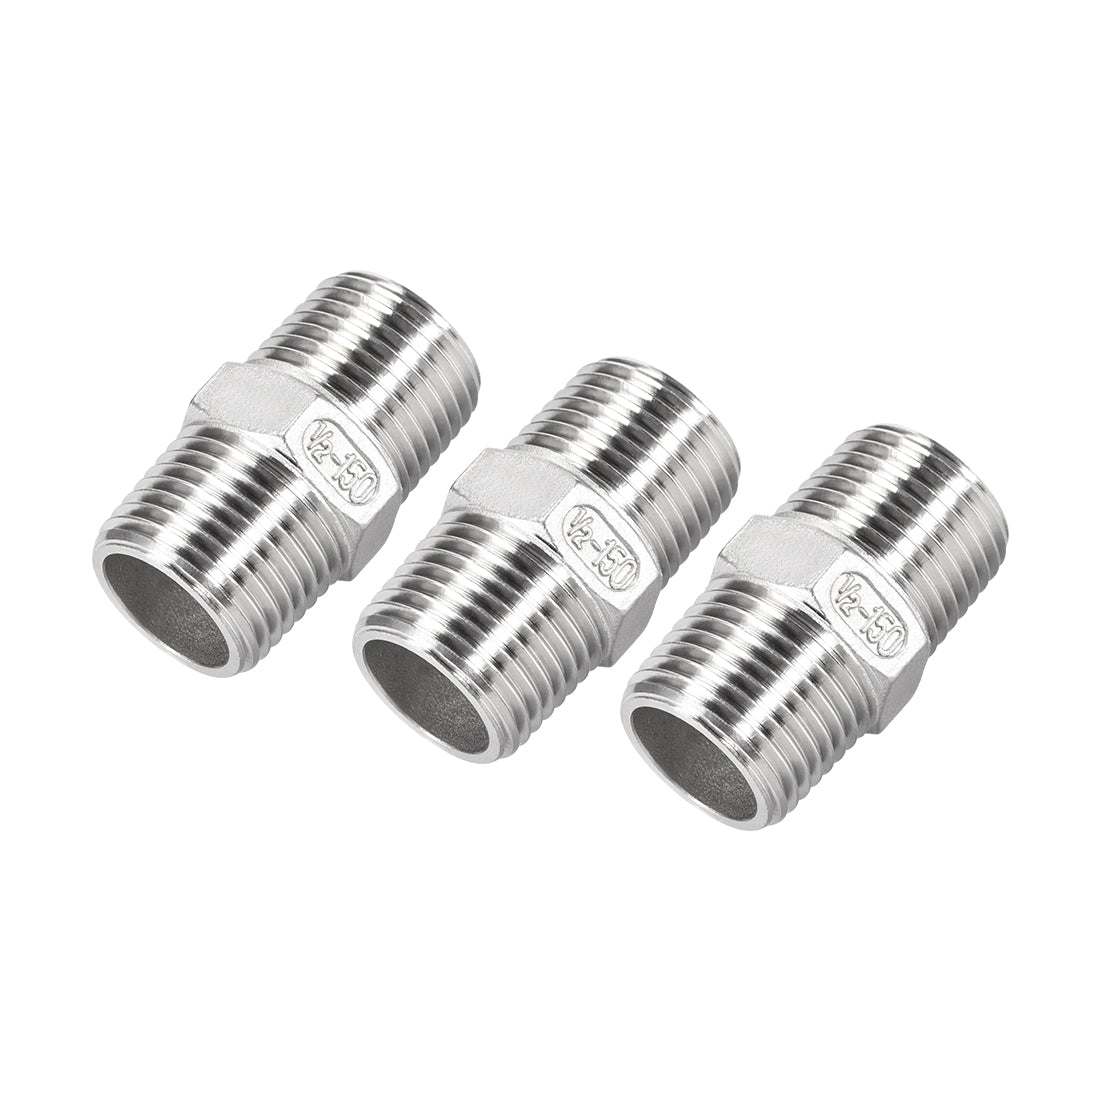 uxcell Uxcell Stainless Steel 304 Cast Pipe Fittings Coupling 1/2 x 1/2 G Male 3pcs